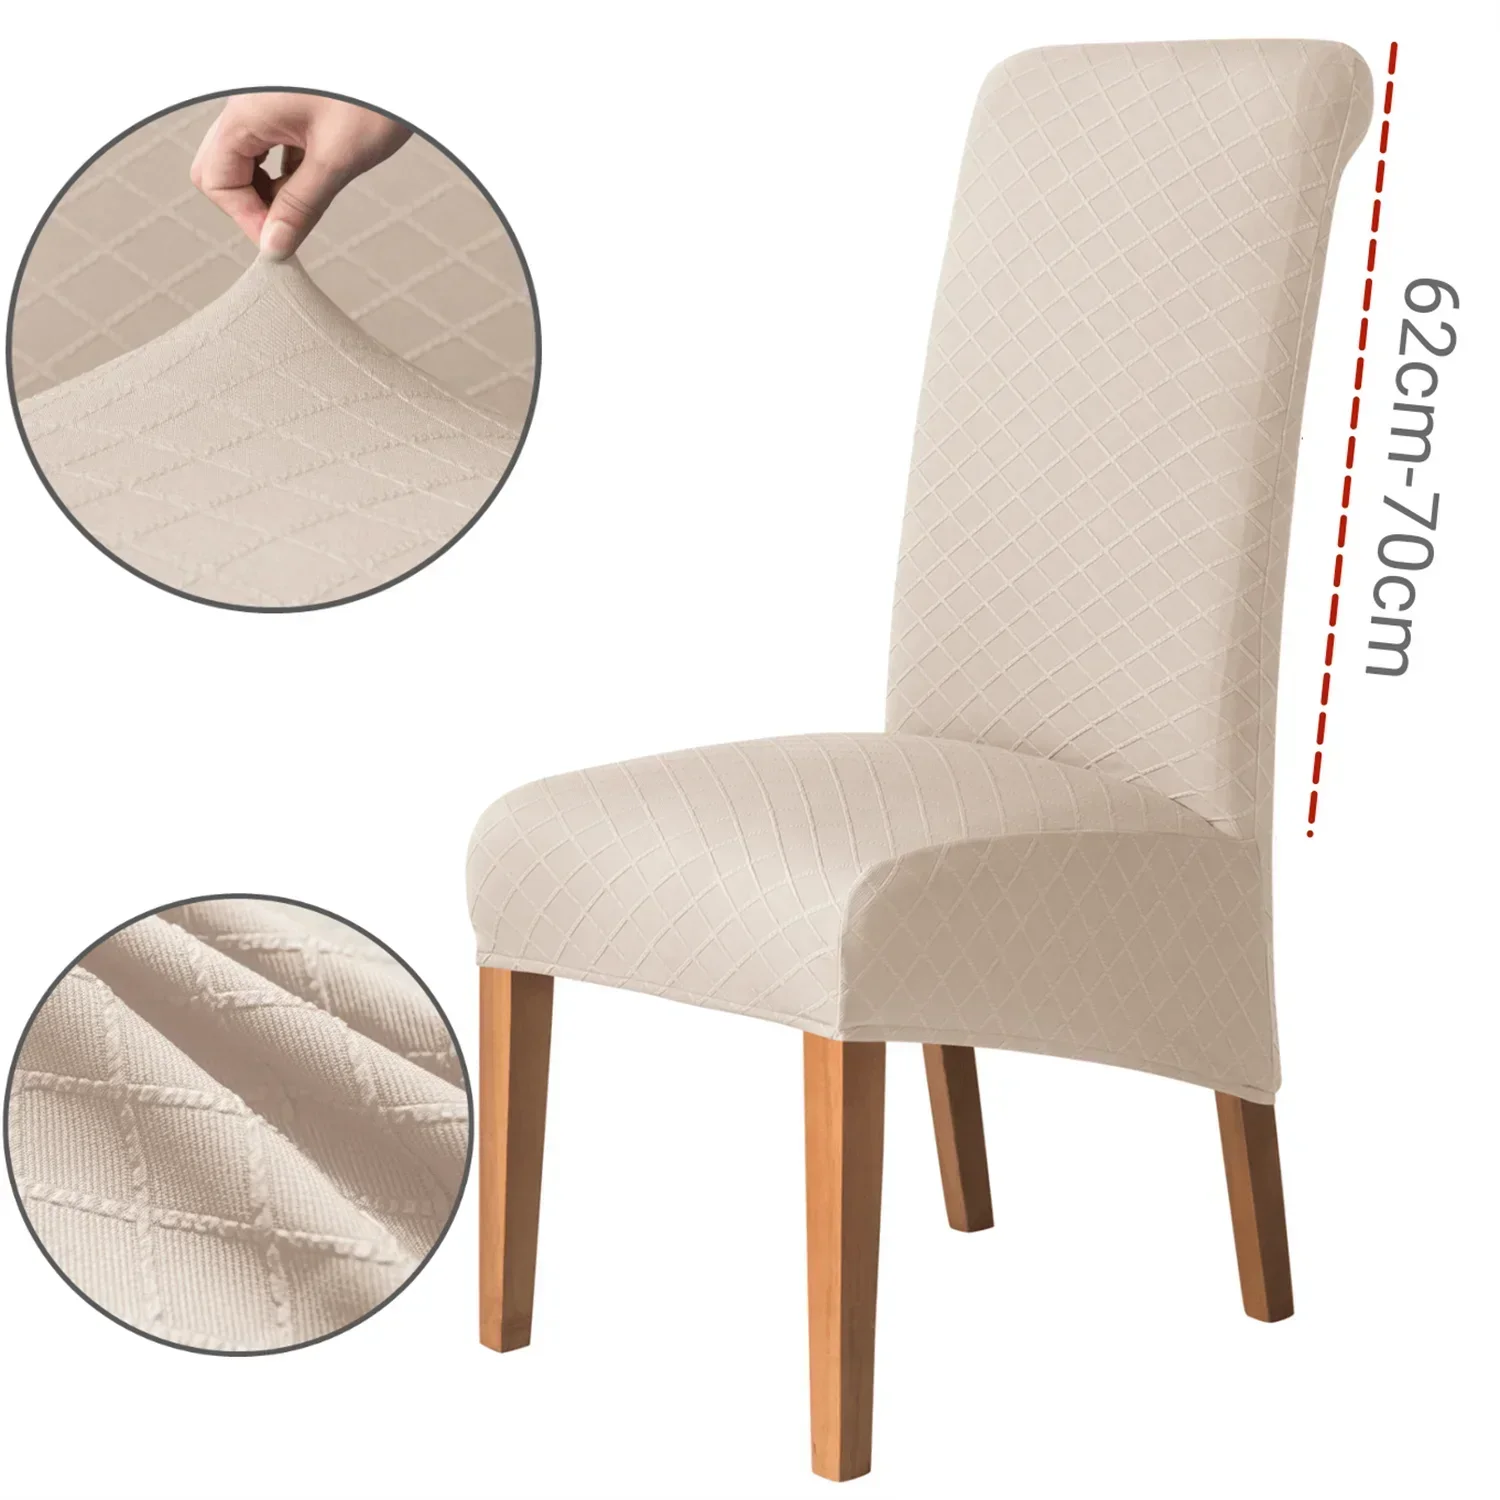 

Thick Jacquard Large Dining Chair Covers Seat Slipcover Stretch Large Highback Dining Room Chair Protector Washable Removable